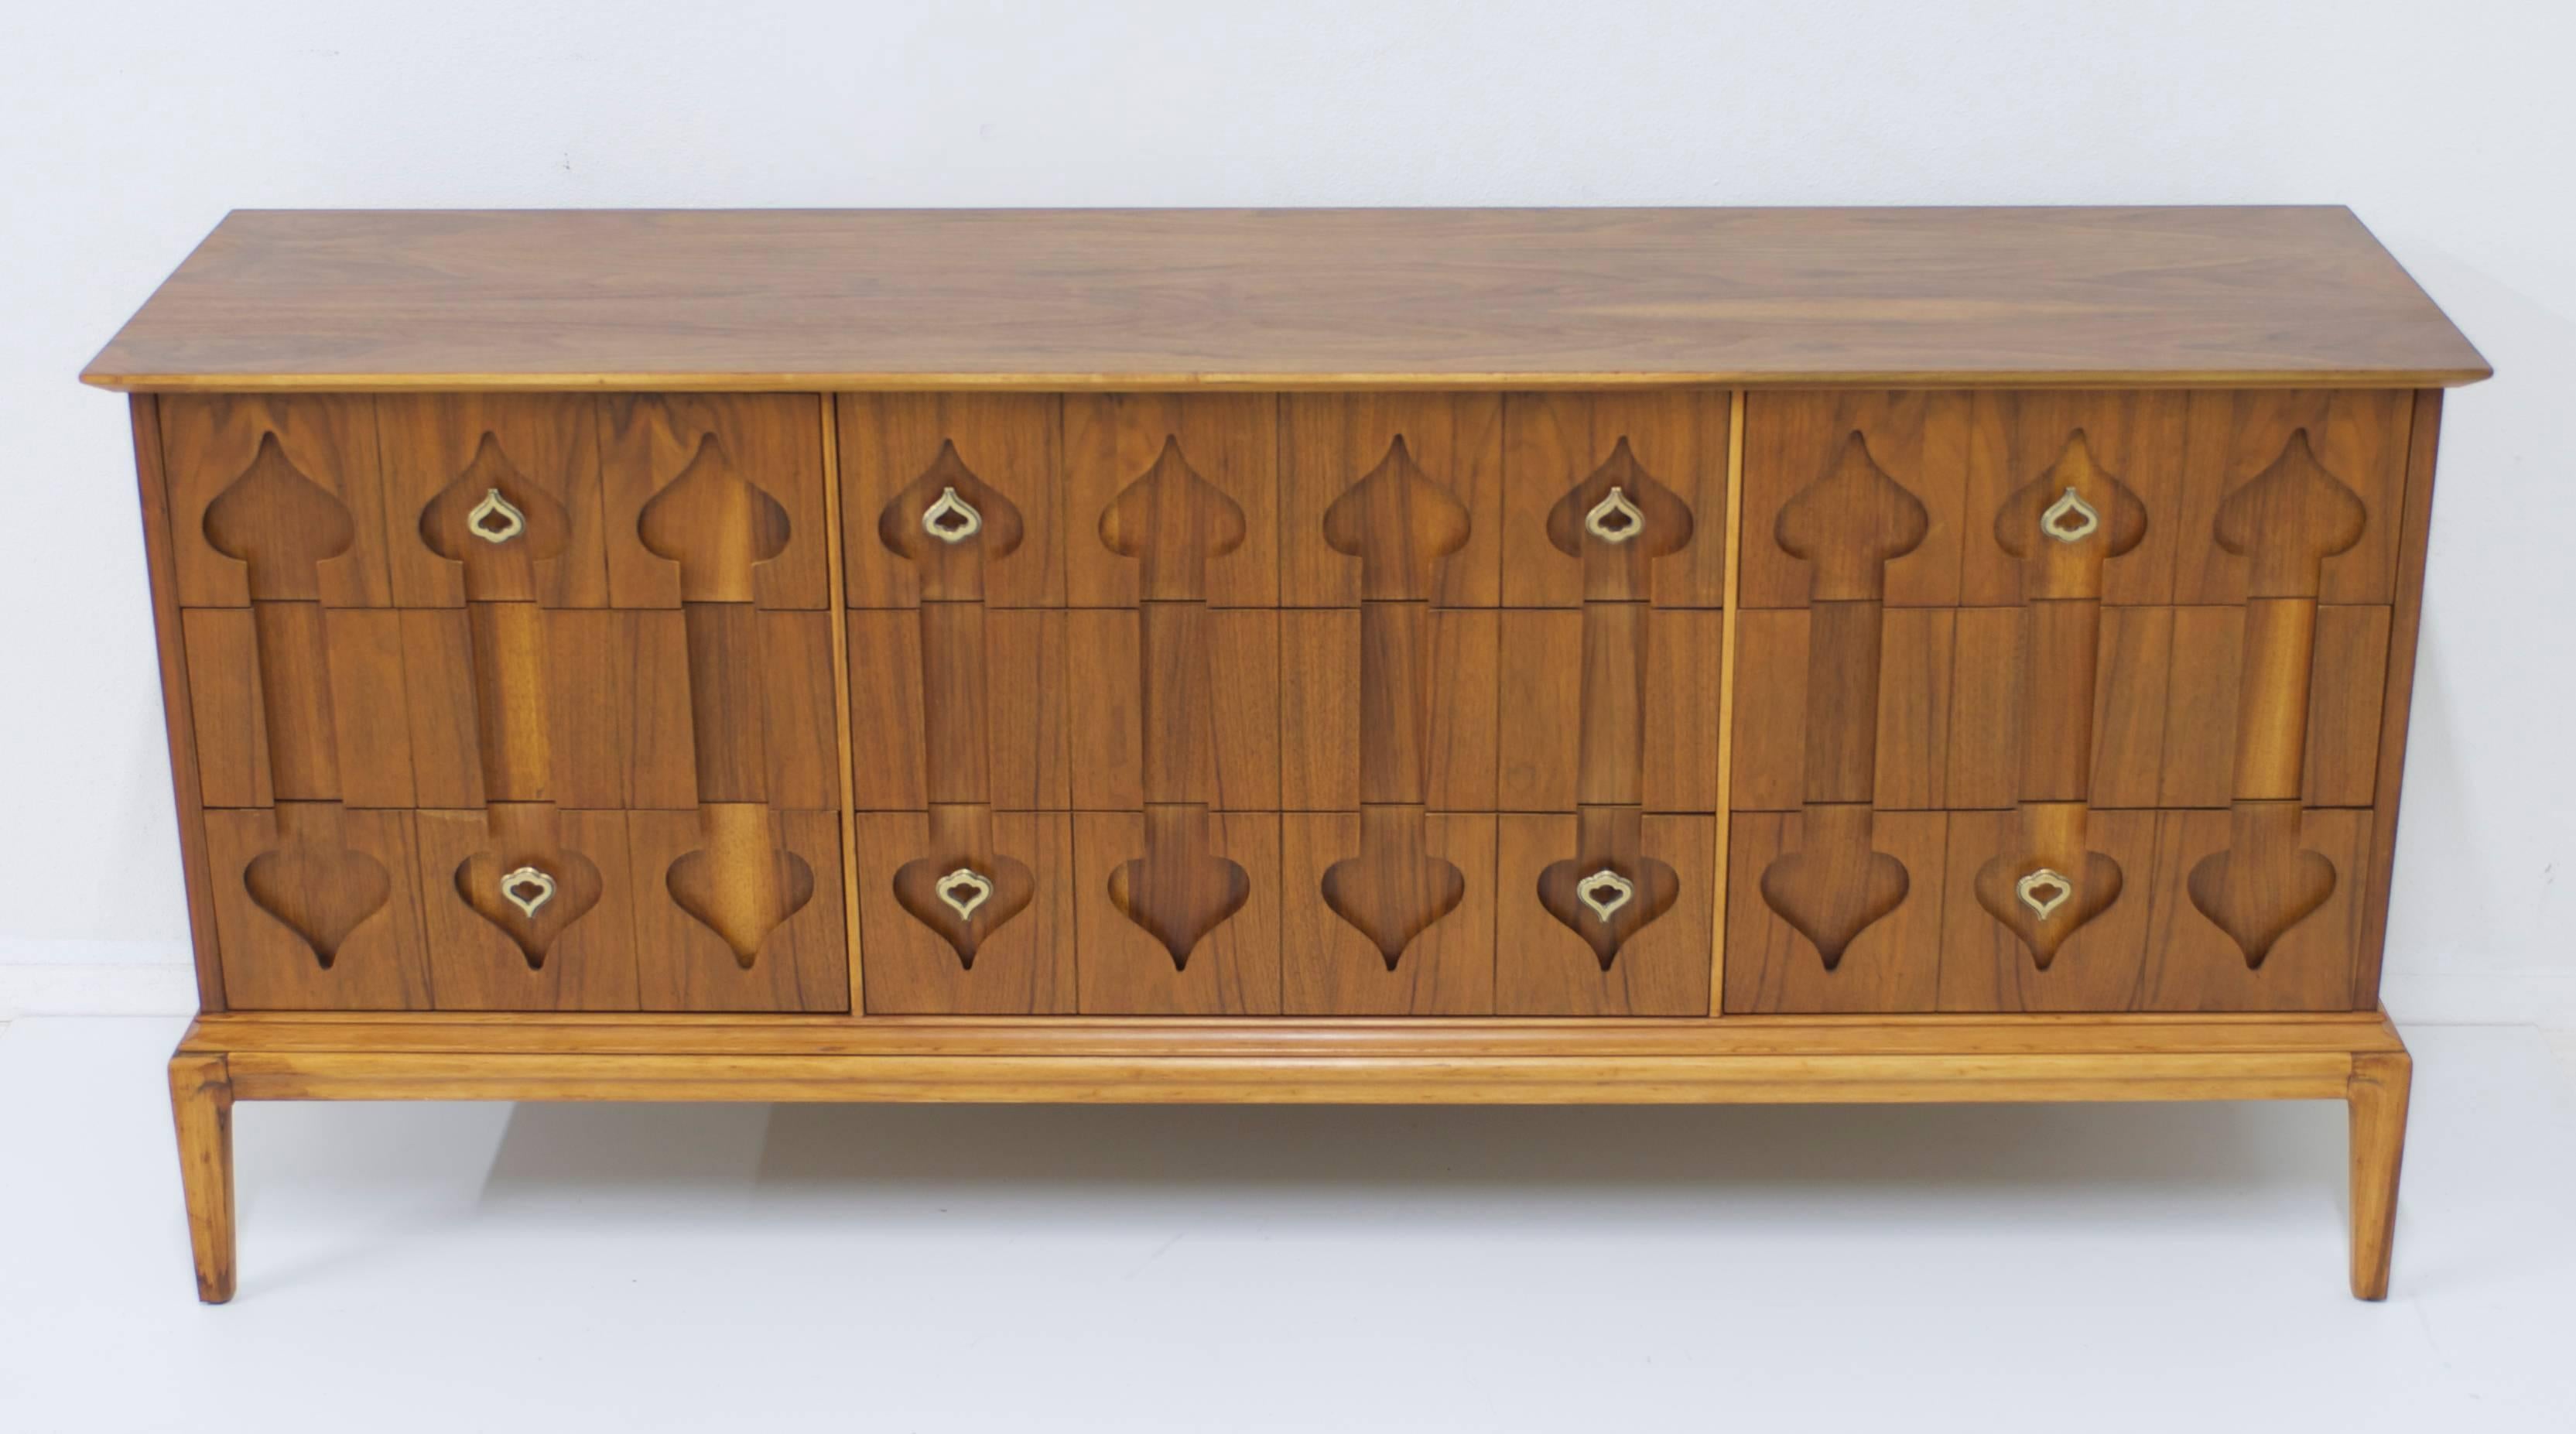 This nine-drawer Moroccan style dresser has matte nickel pulls.
The walnut wood has been gently restored so it is in showroom condition.